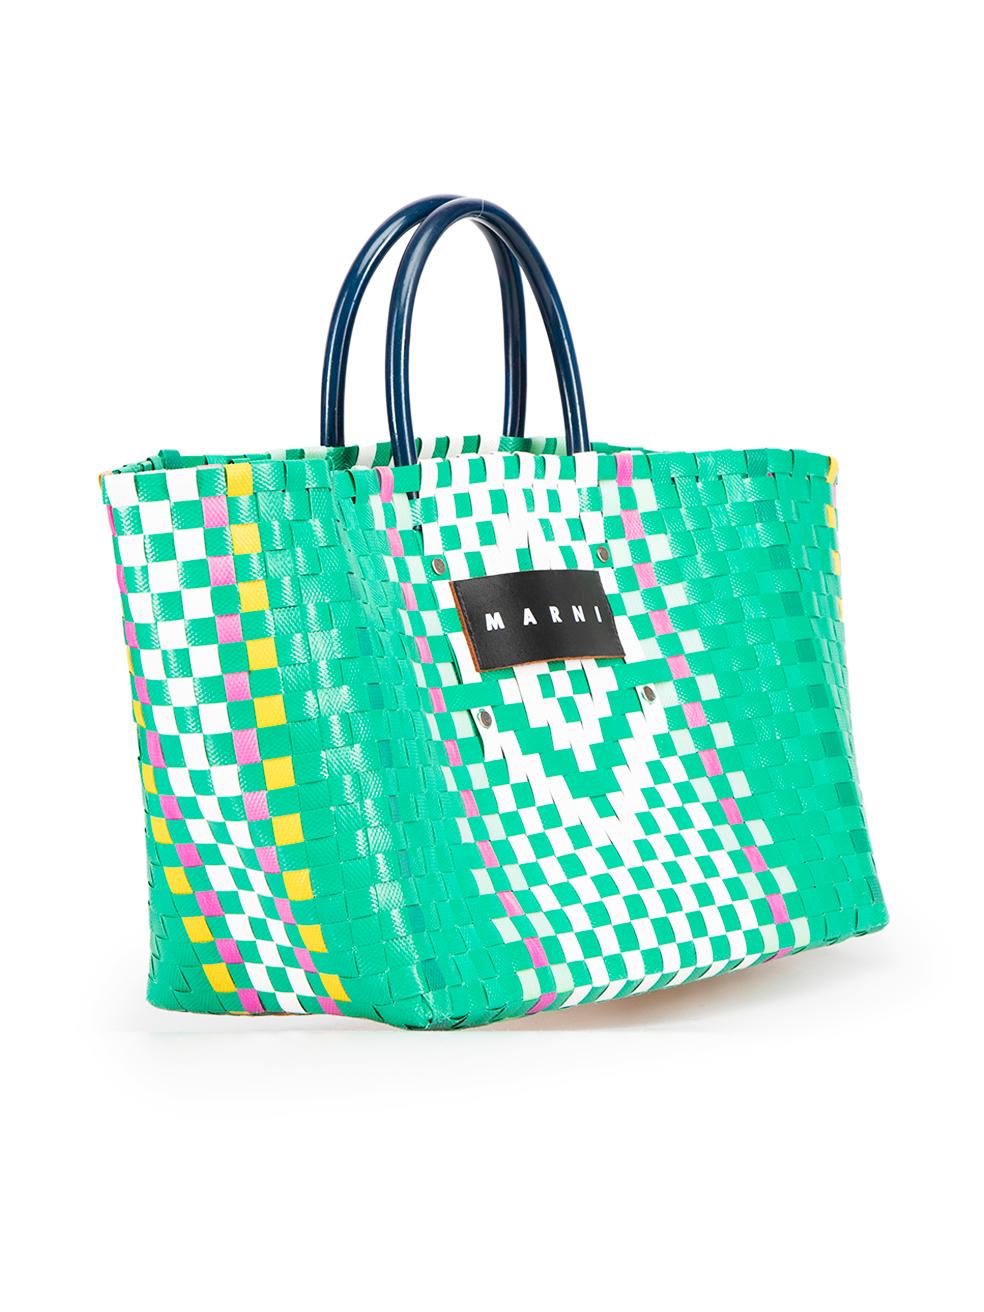 CONDITION is Good. Minor wear to bag is evident. Light wear to the lining, front and back with discoloured markings and minor splintering of weave on this used Marni designer resale item.



Details


Green

Wicker

Large tote bag

Multicoloured